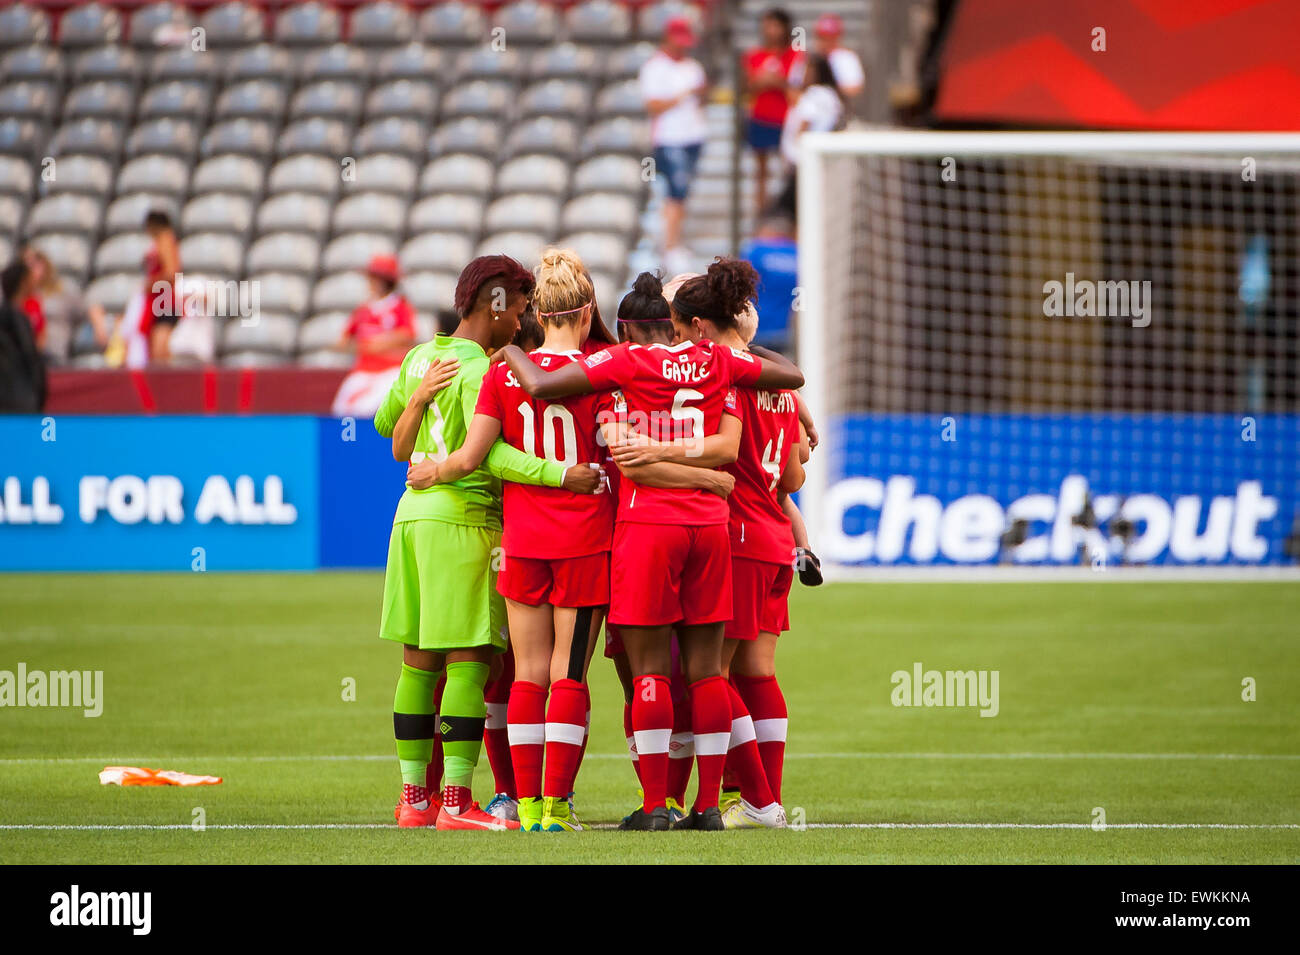 Vancouver, Canada. 27th June, 2015. Canada players huddle and midfield following the quarterfinal match between Canada and England at the FIFA Women's World Cup Canada 2015 at BC Place Stadium. England won the match 2-1. Credit:  Matt Jacques/Alamy Live News Stock Photo